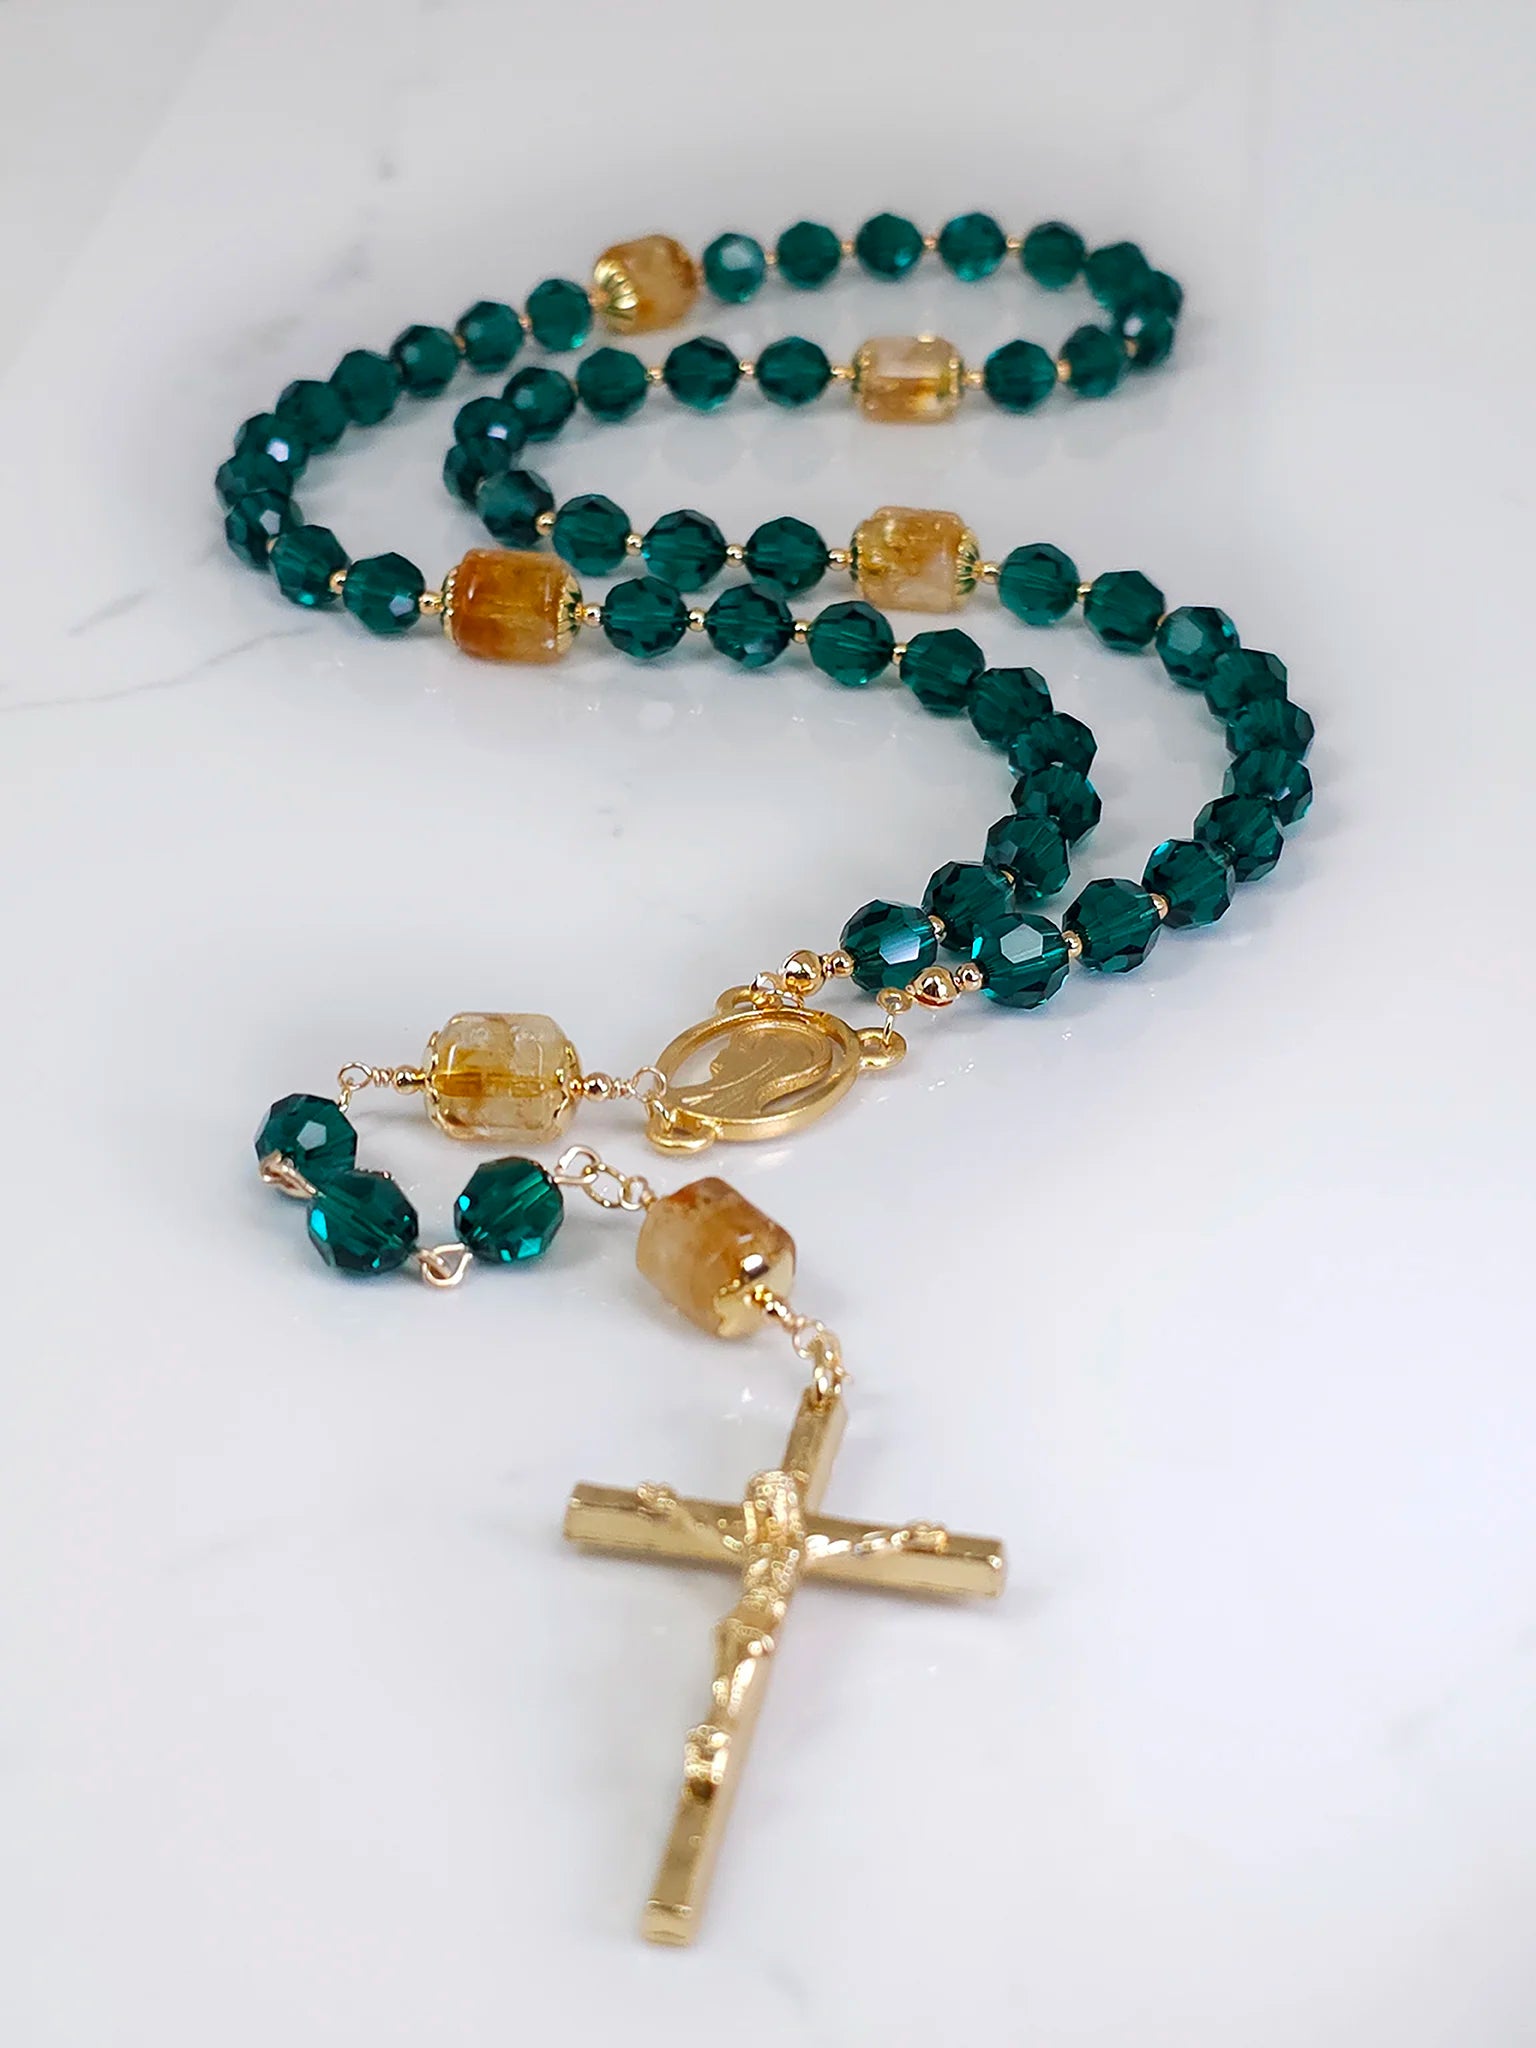 Birthstone-inspired rosary emphasizing the significance of emerald, displayed against a white background.